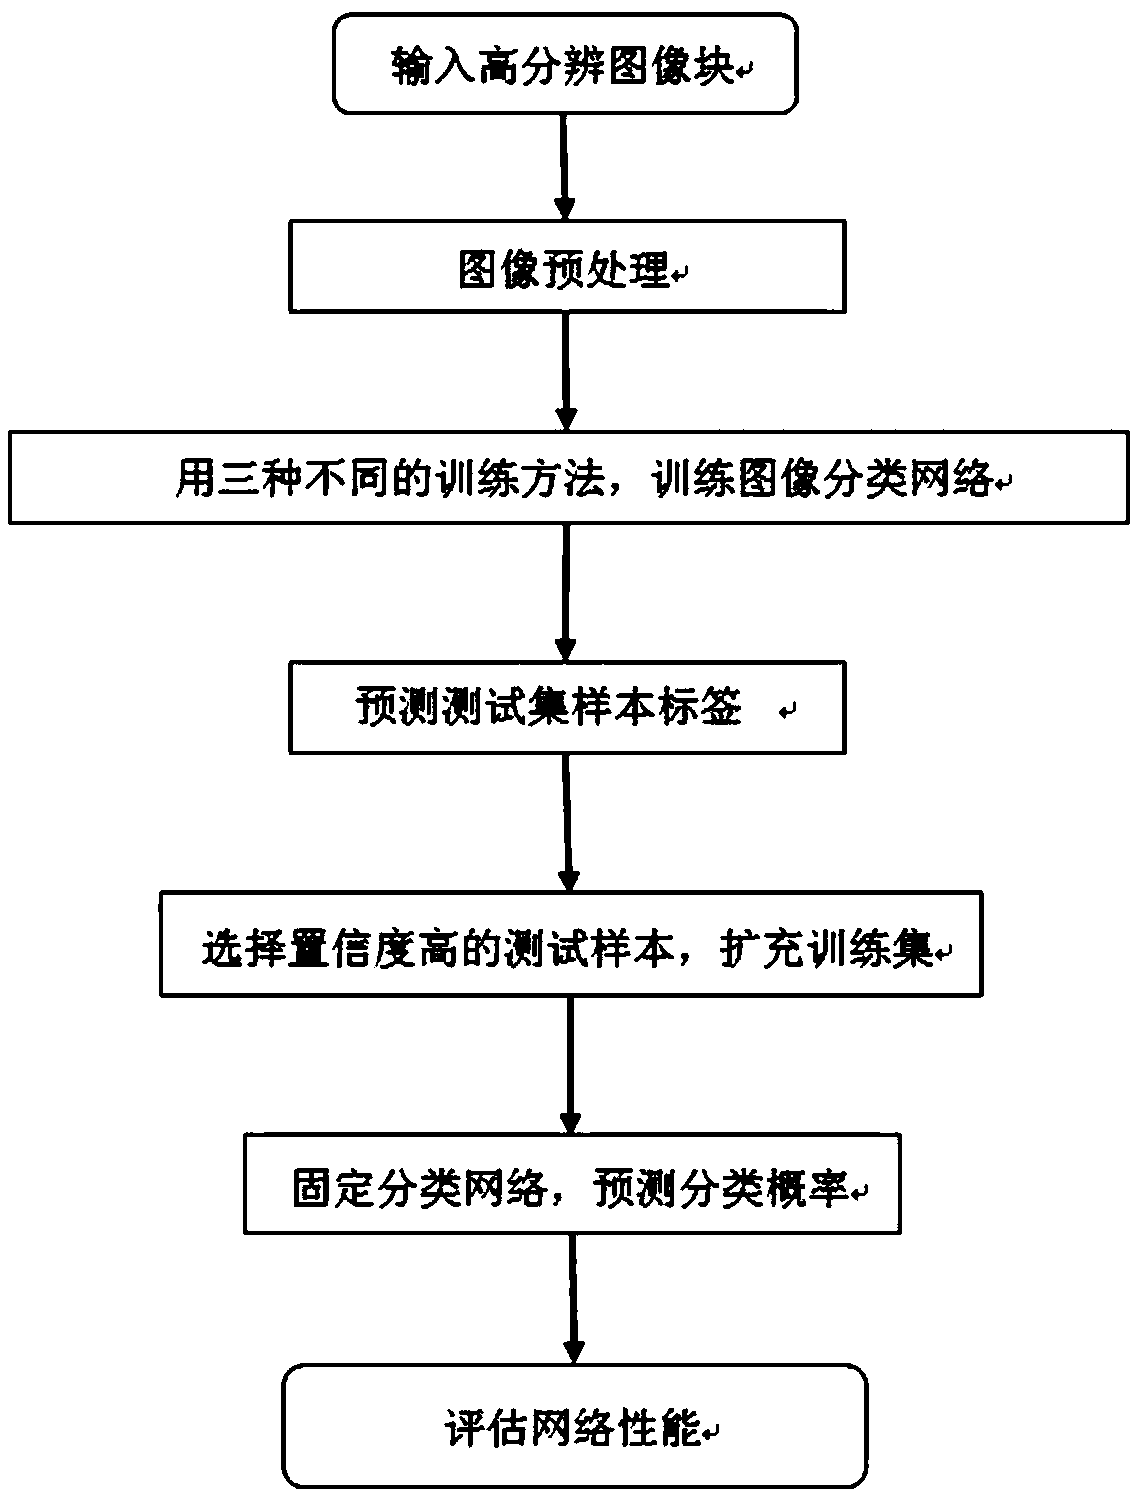 Hyperspectral classification method based on double-branch network